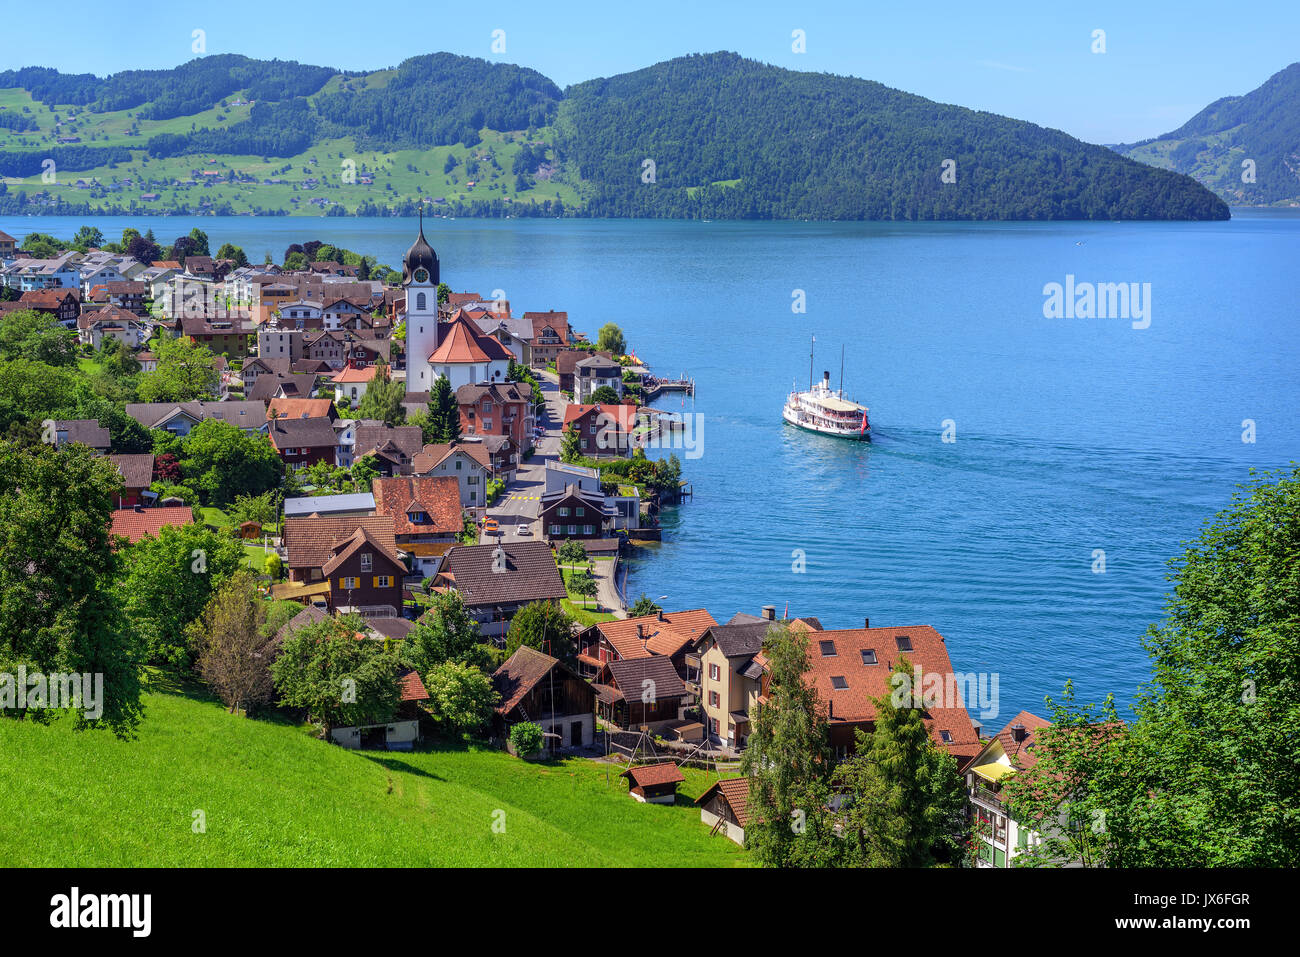 Cruise ship arriving in small town Beckenried on Lake Lucerne, swiss Alps mountains, Switzerland Stock Photo